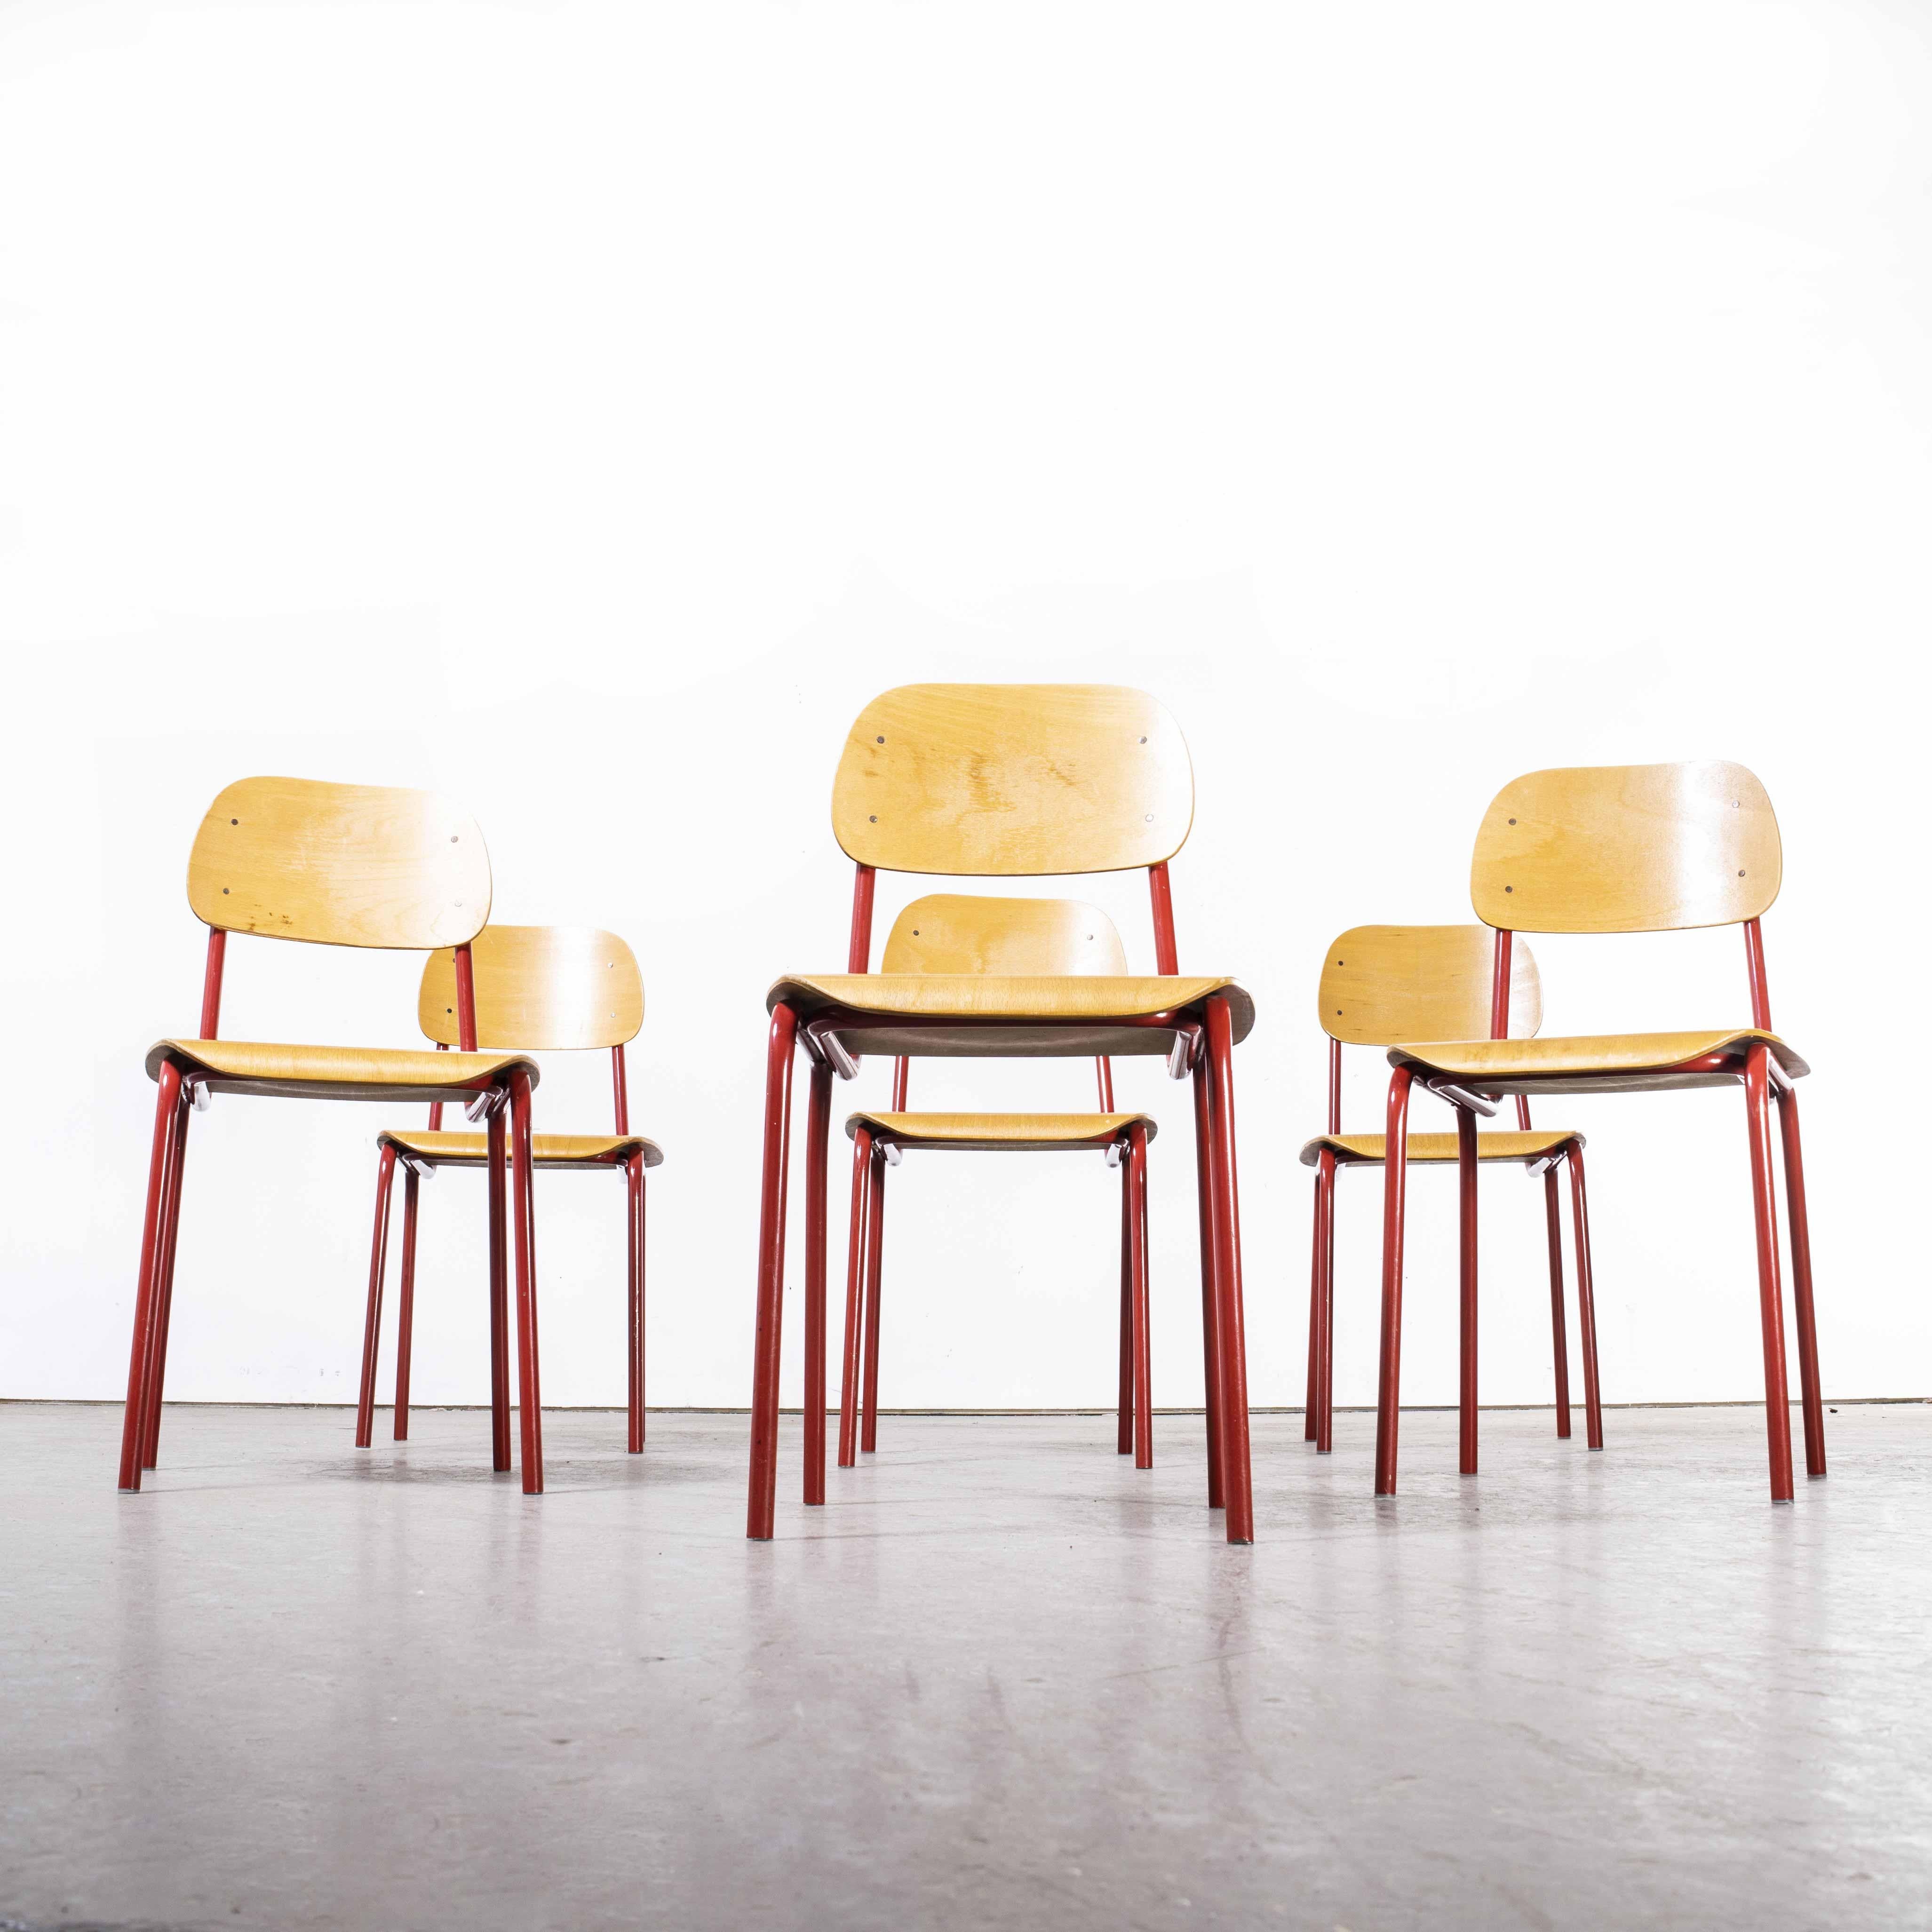 1970's Czech Industrial Stacking Chairs, Red, Set of Six For Sale 3